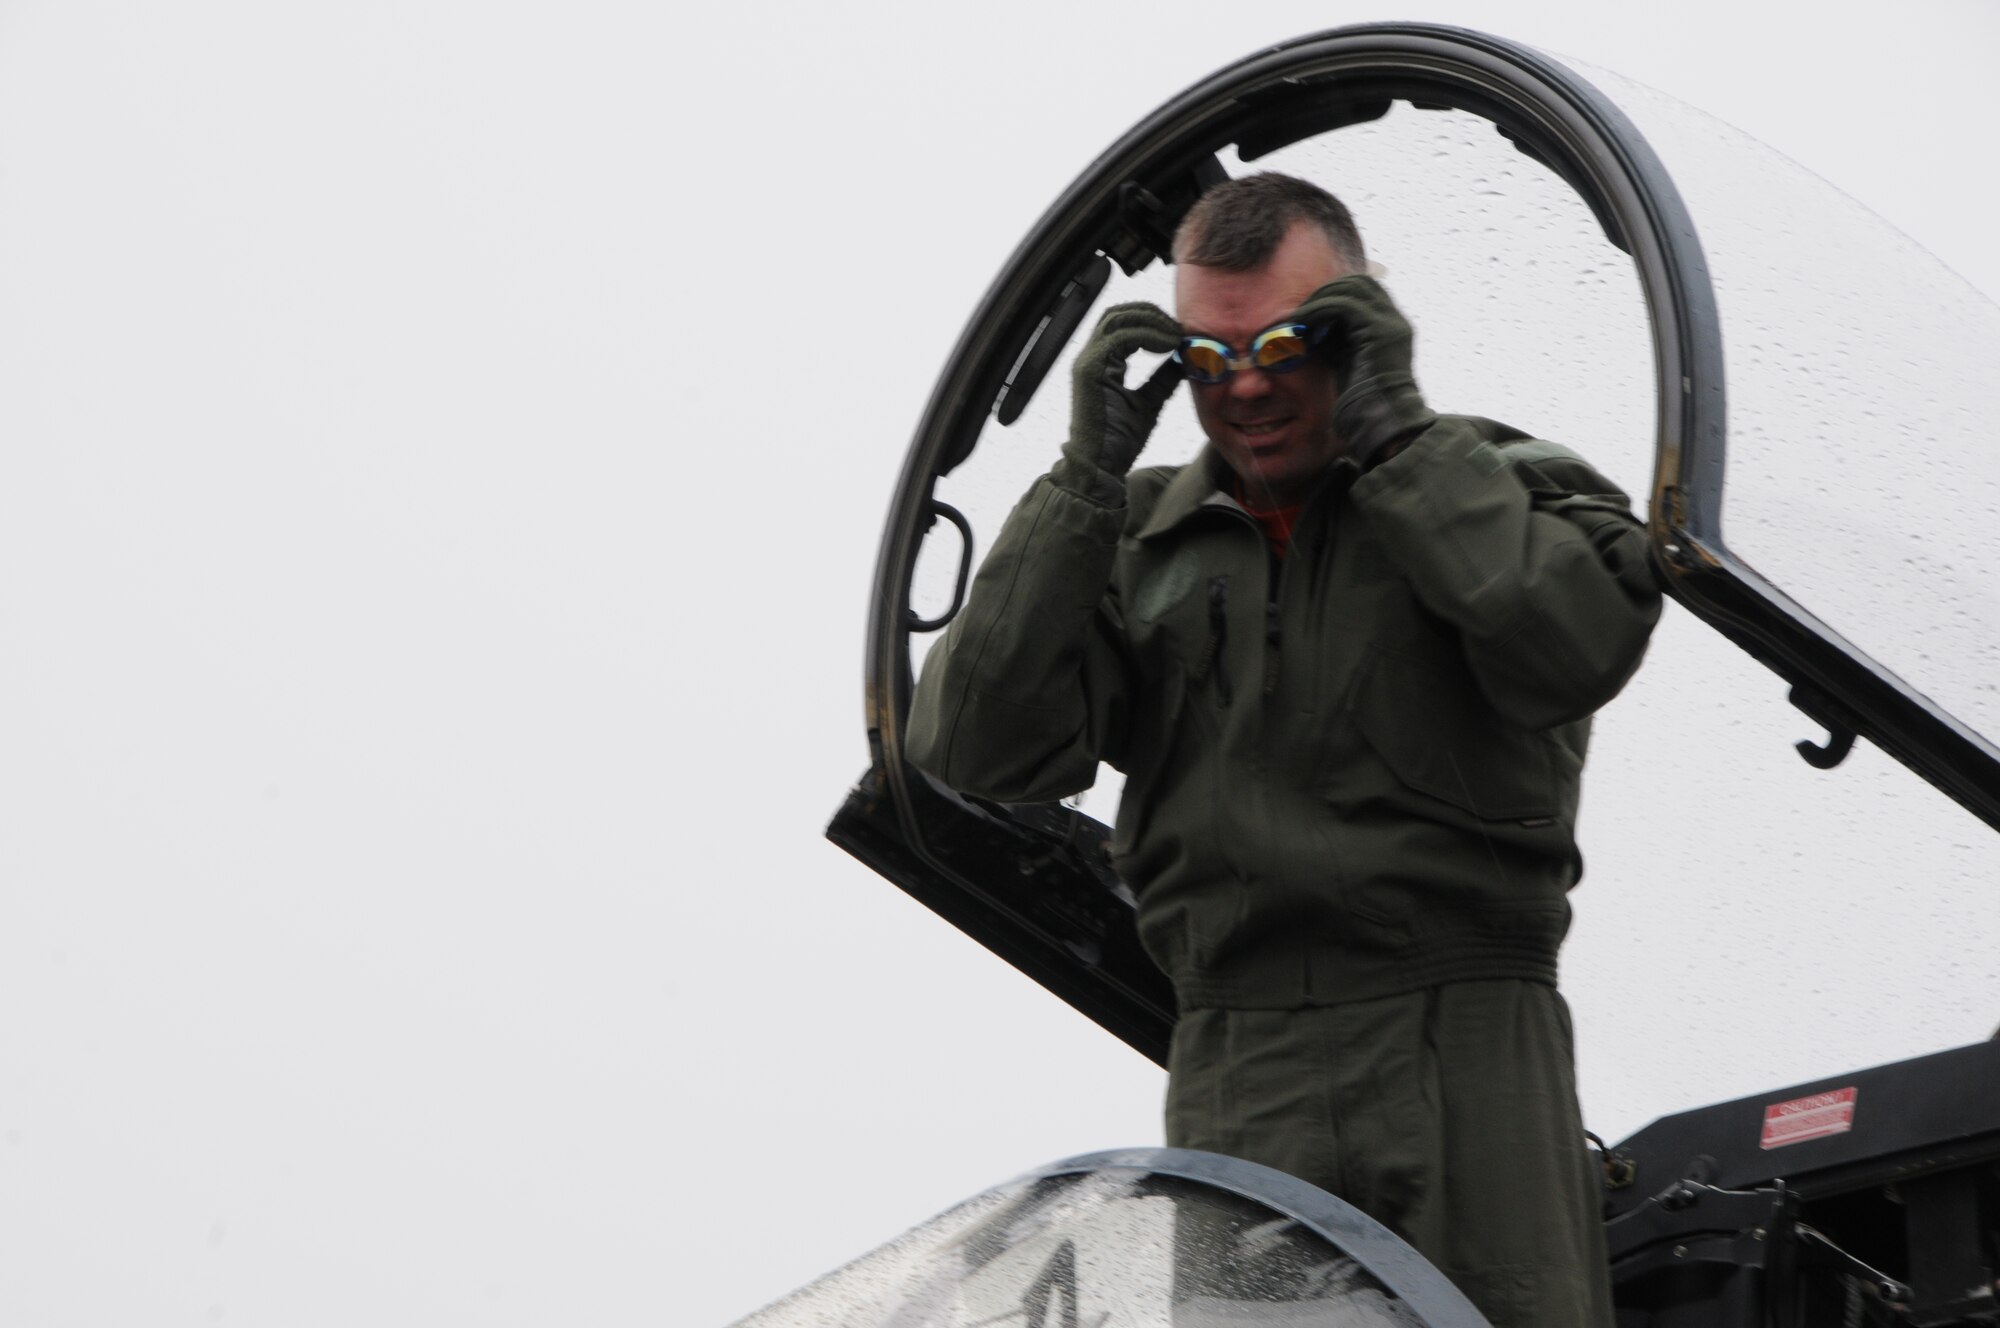 Col. Jeremy “Weed” Baenen, the 173rd Fighter Wing Commander for scant hours before retiring, showcases the forethought that carried him to the helm of the Wing immediately following his “fini flight”, Nov. 21, 2014. The “fini flight” is a tradition among pilots and aircrew where upon disembarking they get hosed down with water. (U.S. Air National Guard photo by Tech. Sgt. Jefferson Thompson/Released)